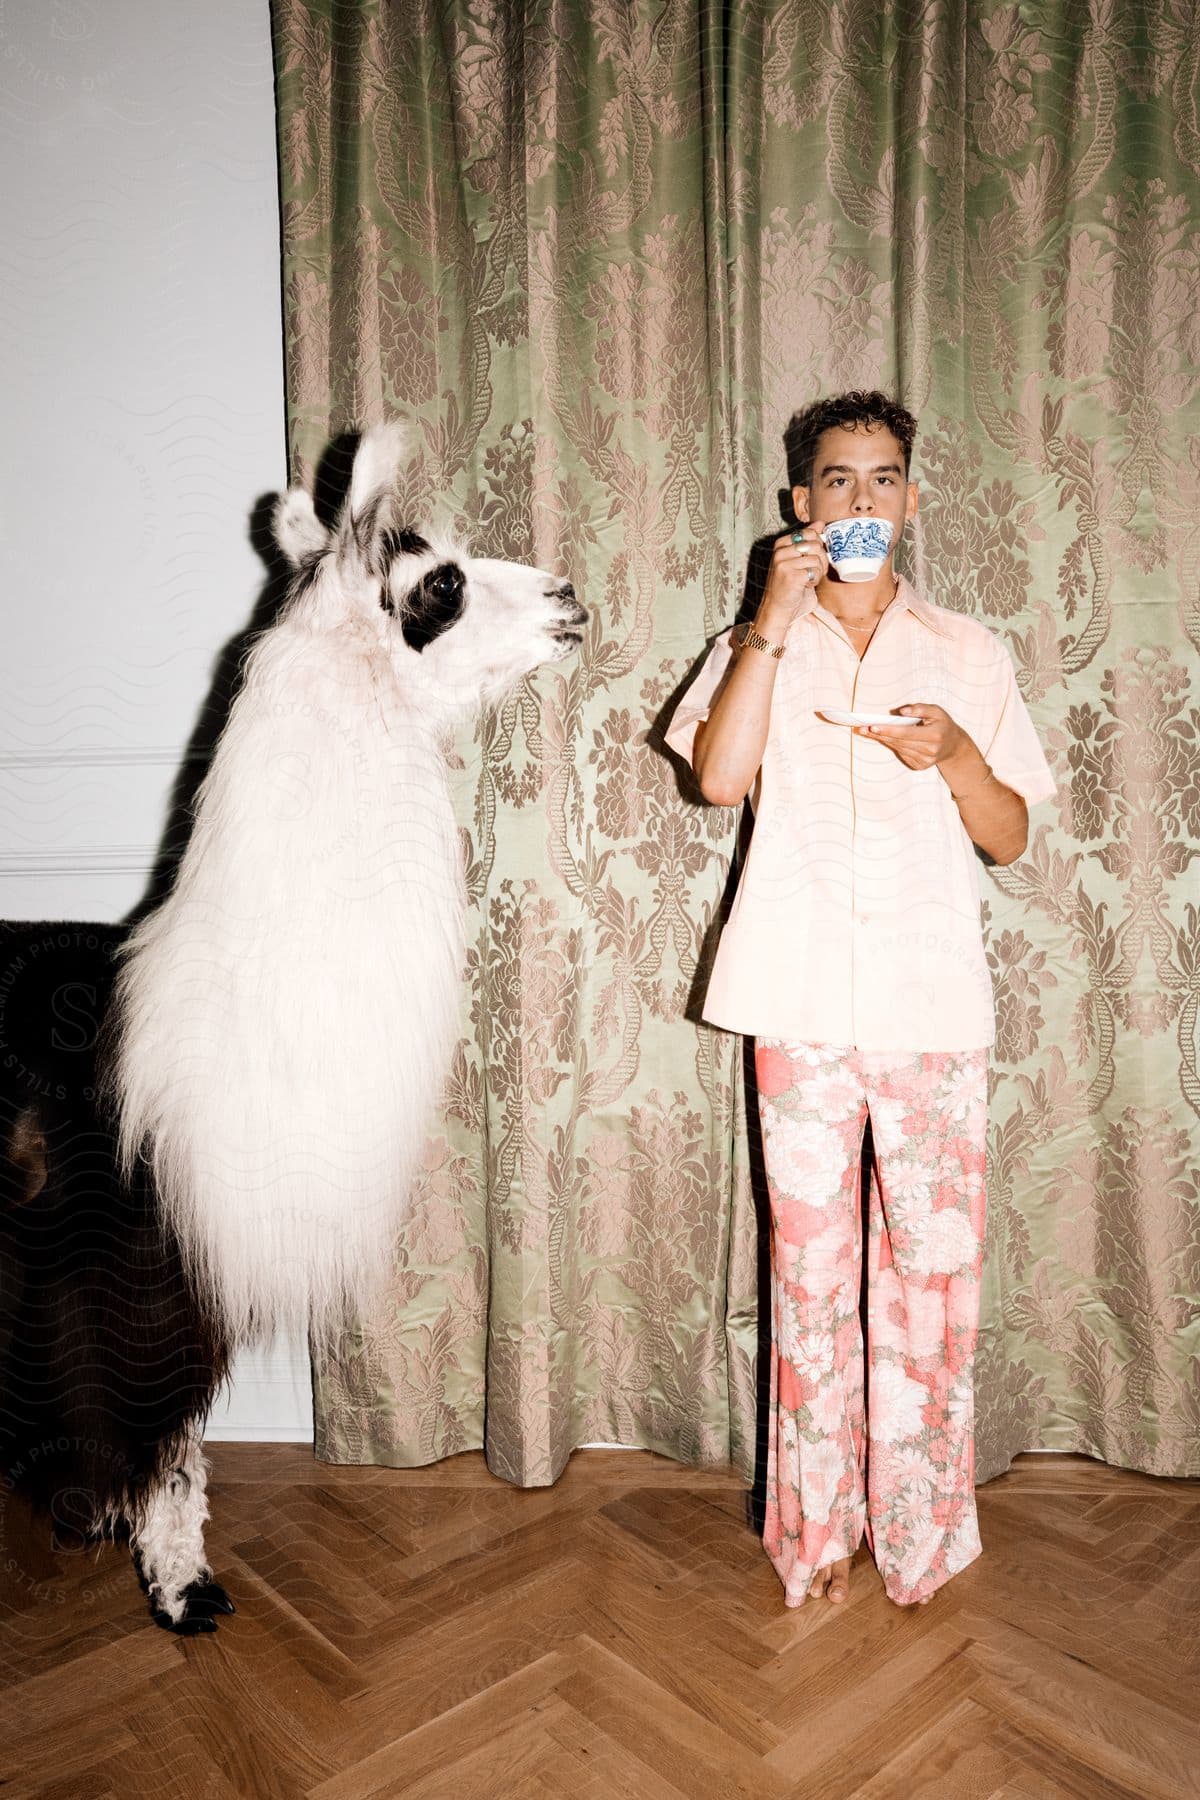 A fashionable man in pink floral attire enjoys a cup of coffee beside a striking black and white llama, against a backdrop of a curtained window.